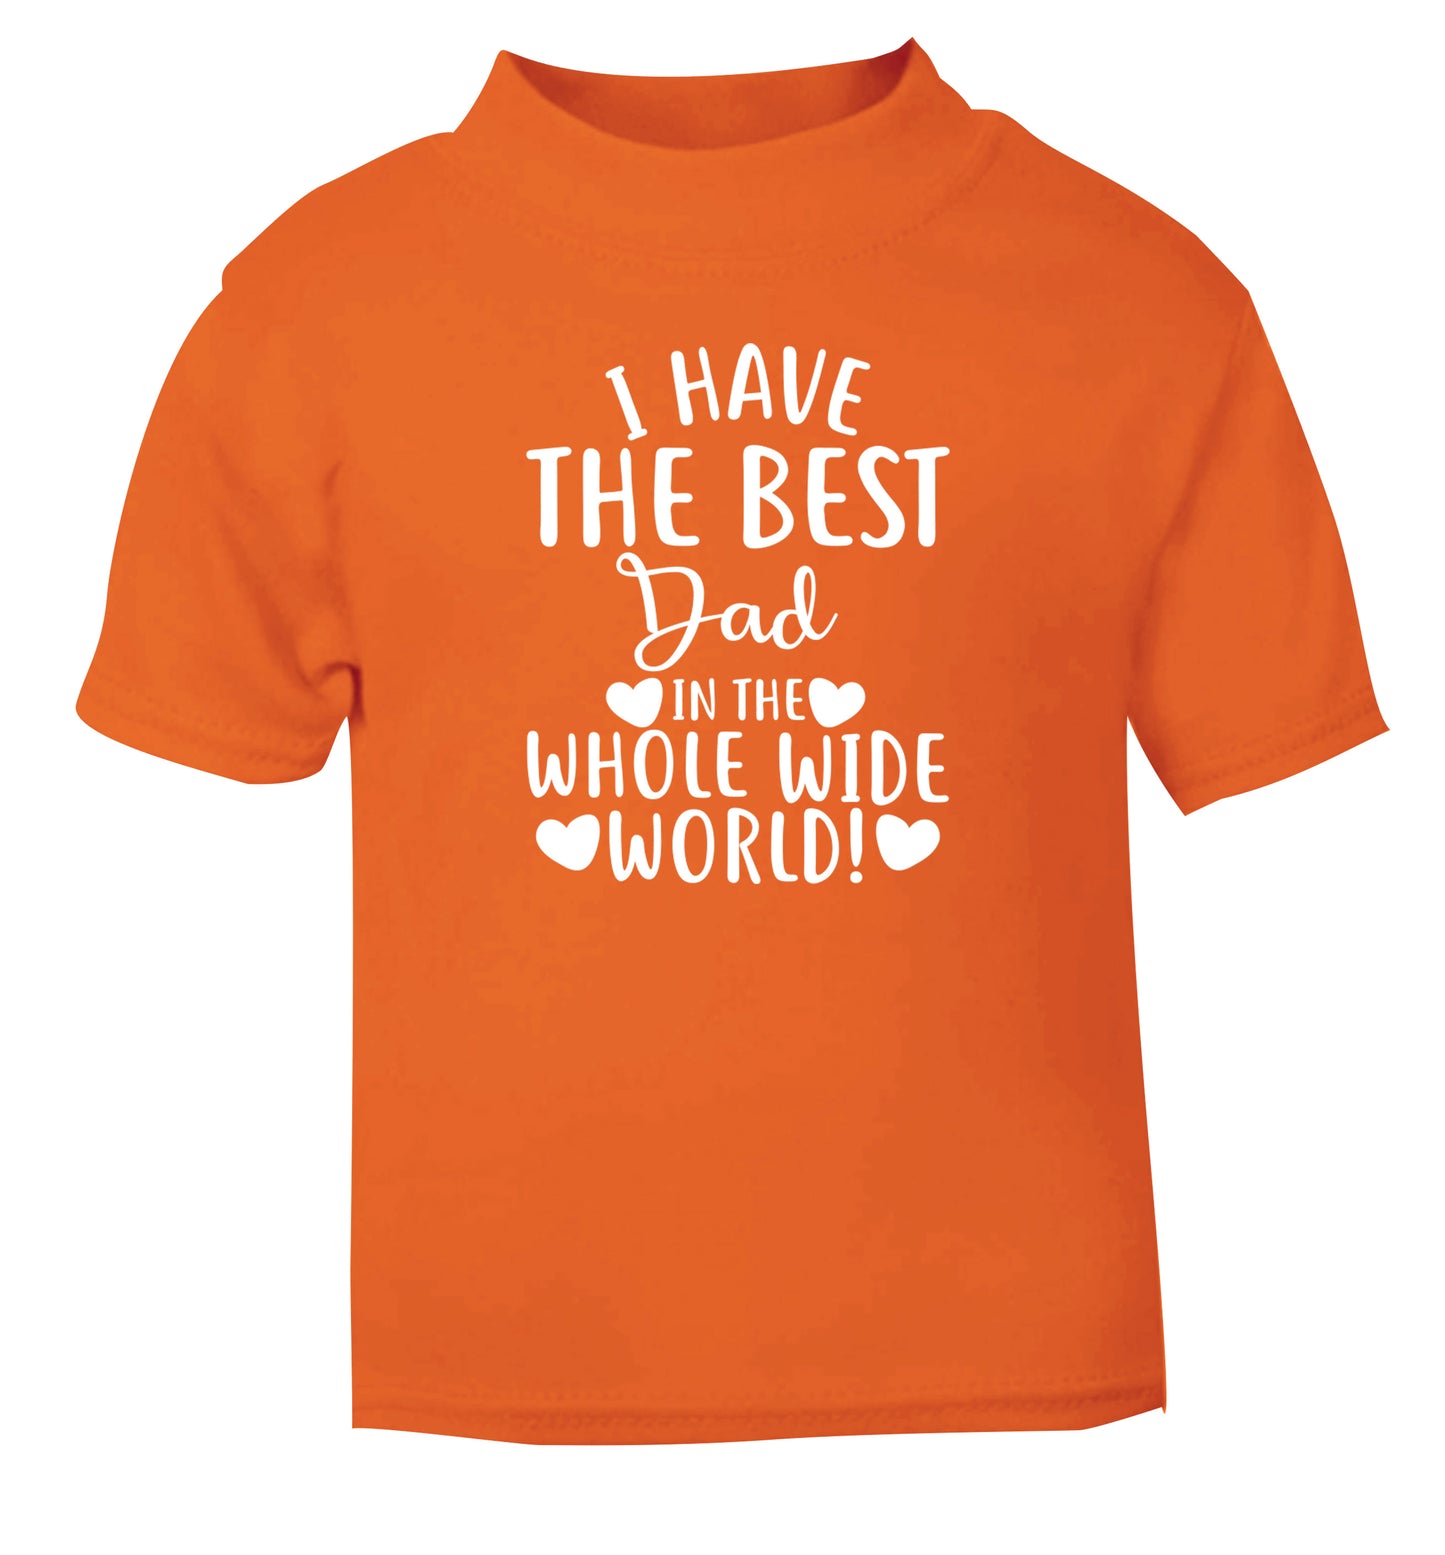 I have the best dad in the whole wide world! orange Baby Toddler Tshirt 2 Years